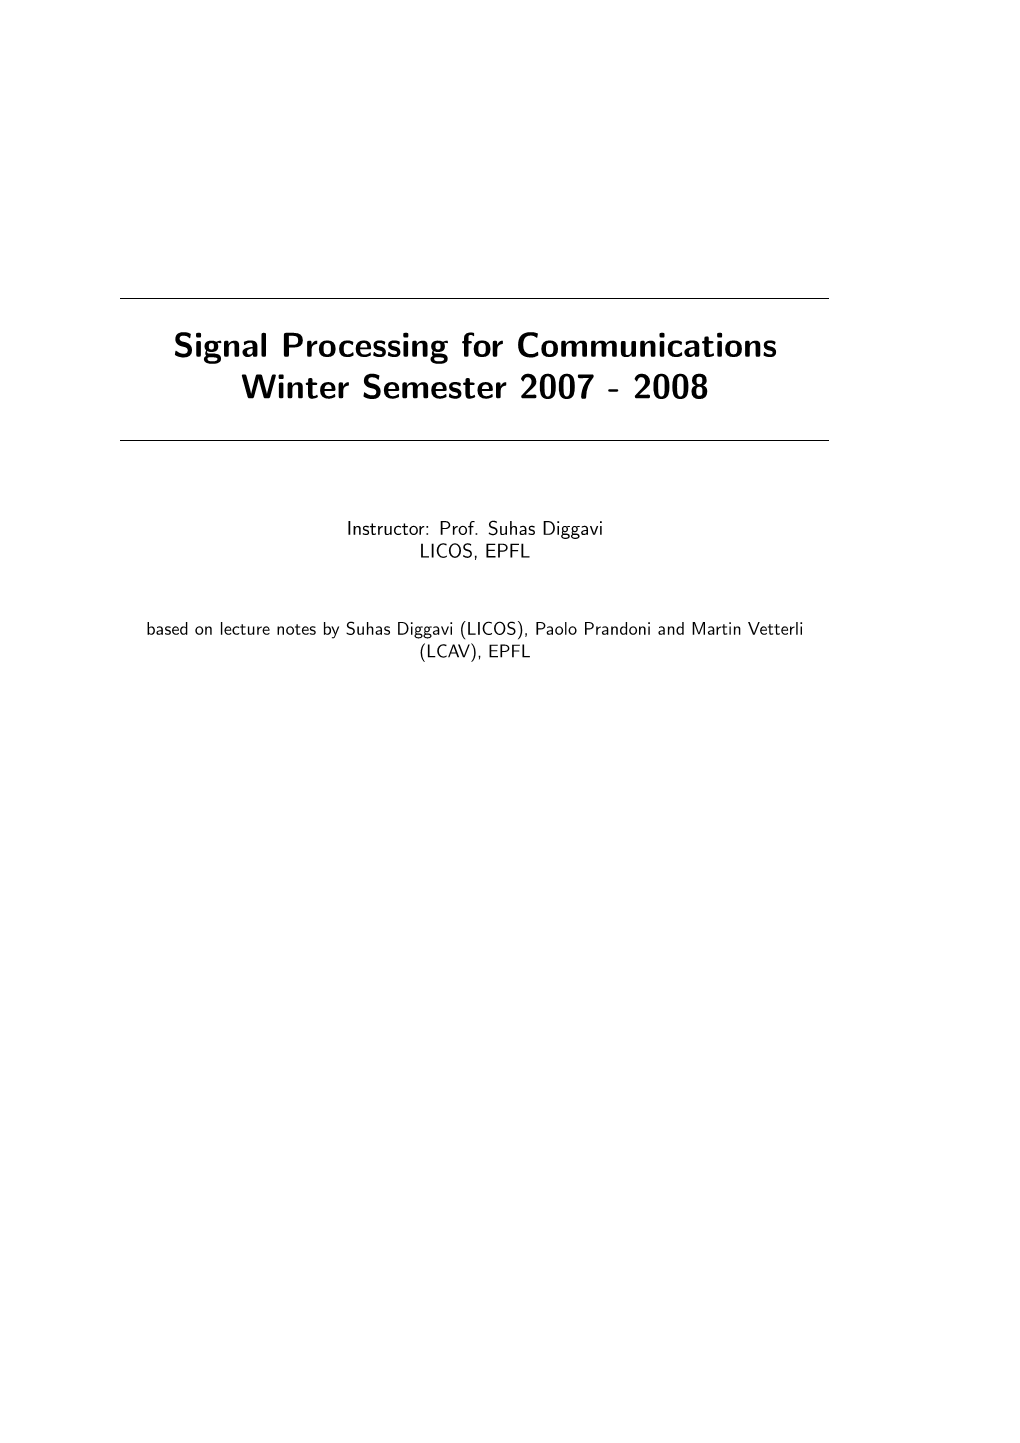 Signal Processing for Communications Winter Semester 2007 - 2008